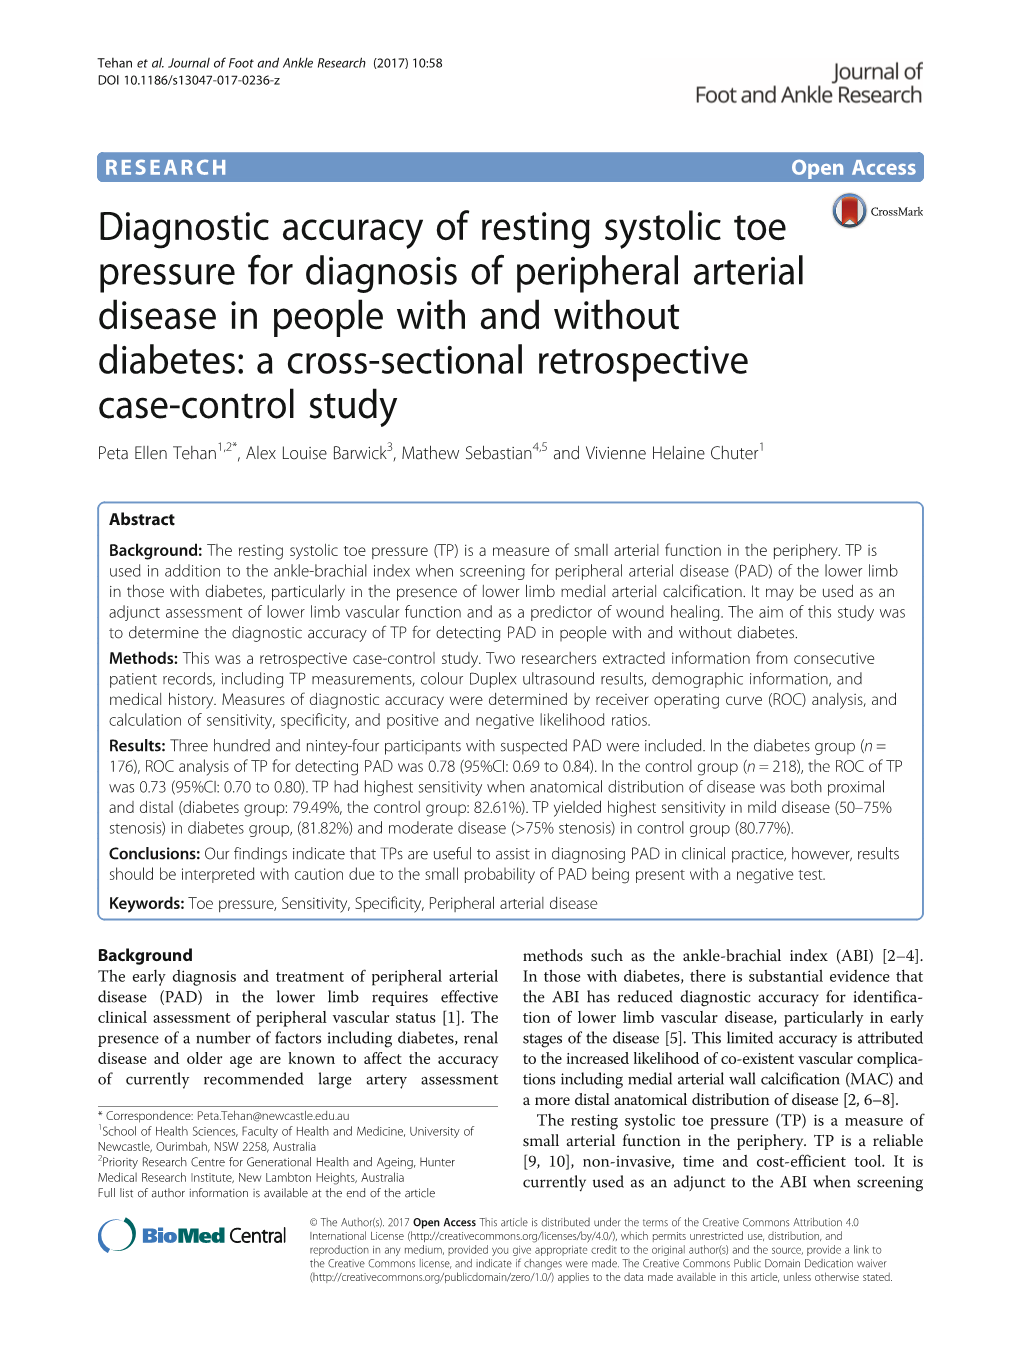 Diagnostic Accuracy of Resting Systolic Toe Pressure for Diagnosis Of